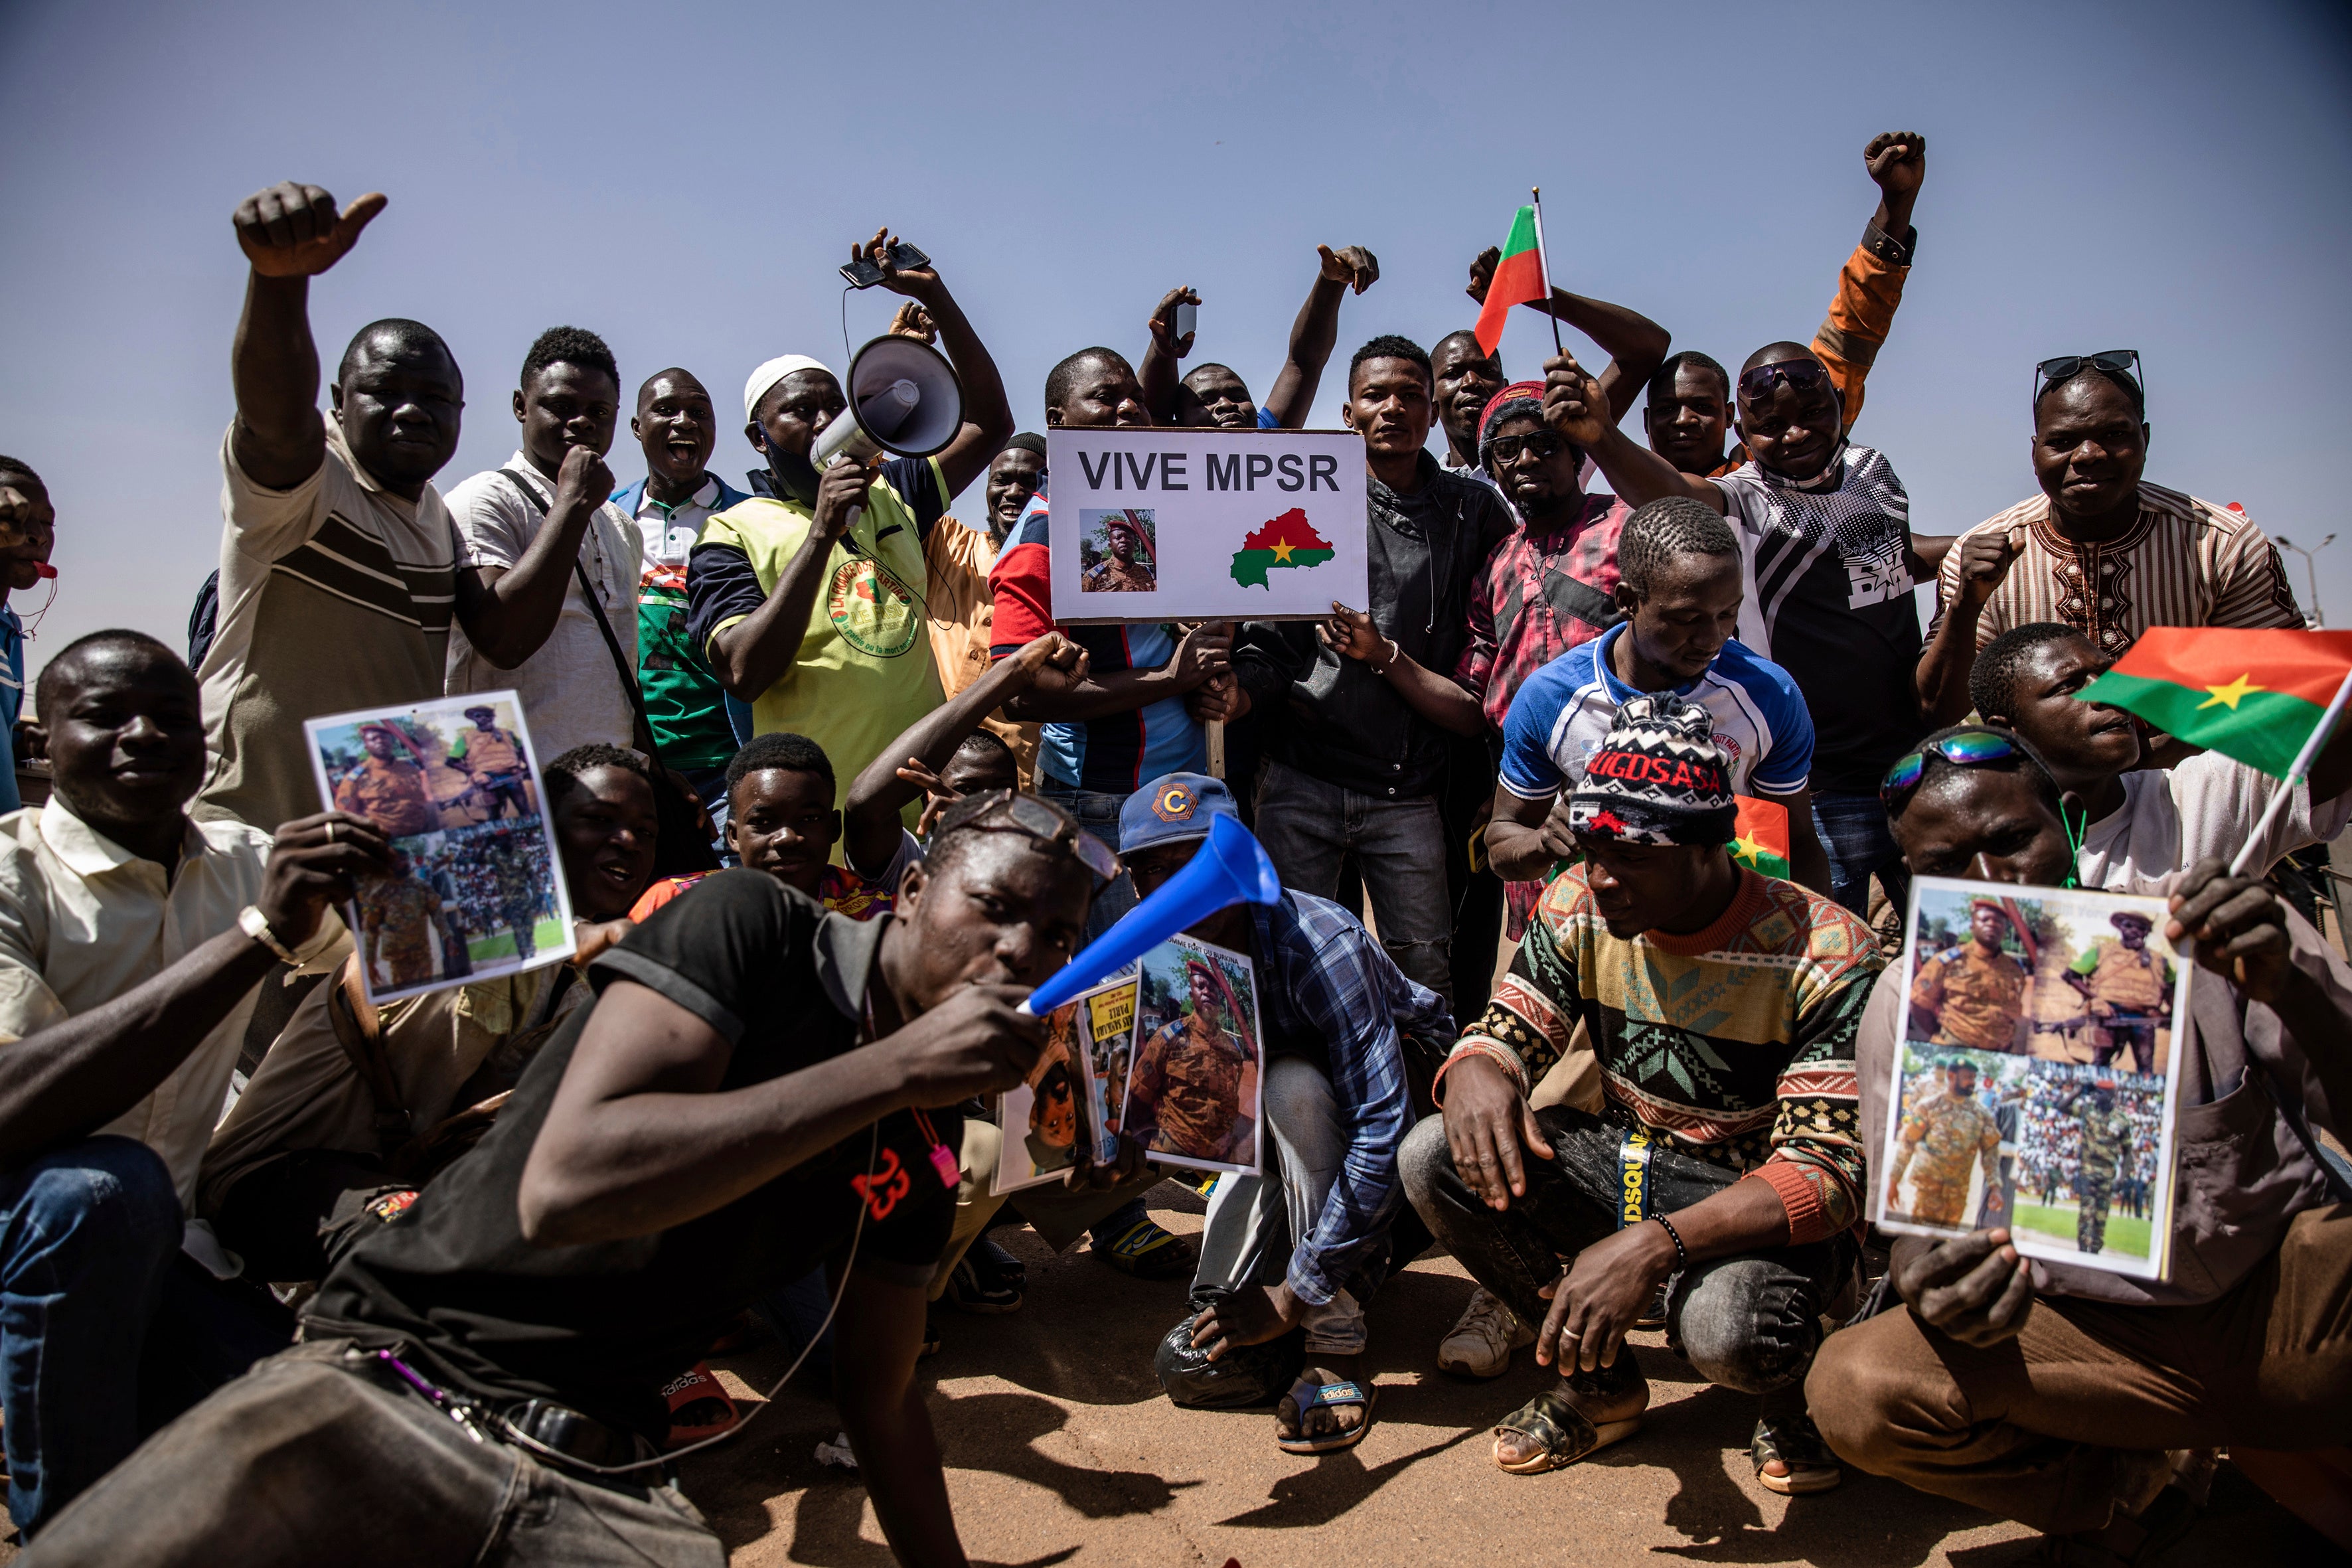 People take to the streets of Ouagadougou to rally in support of the new military junta